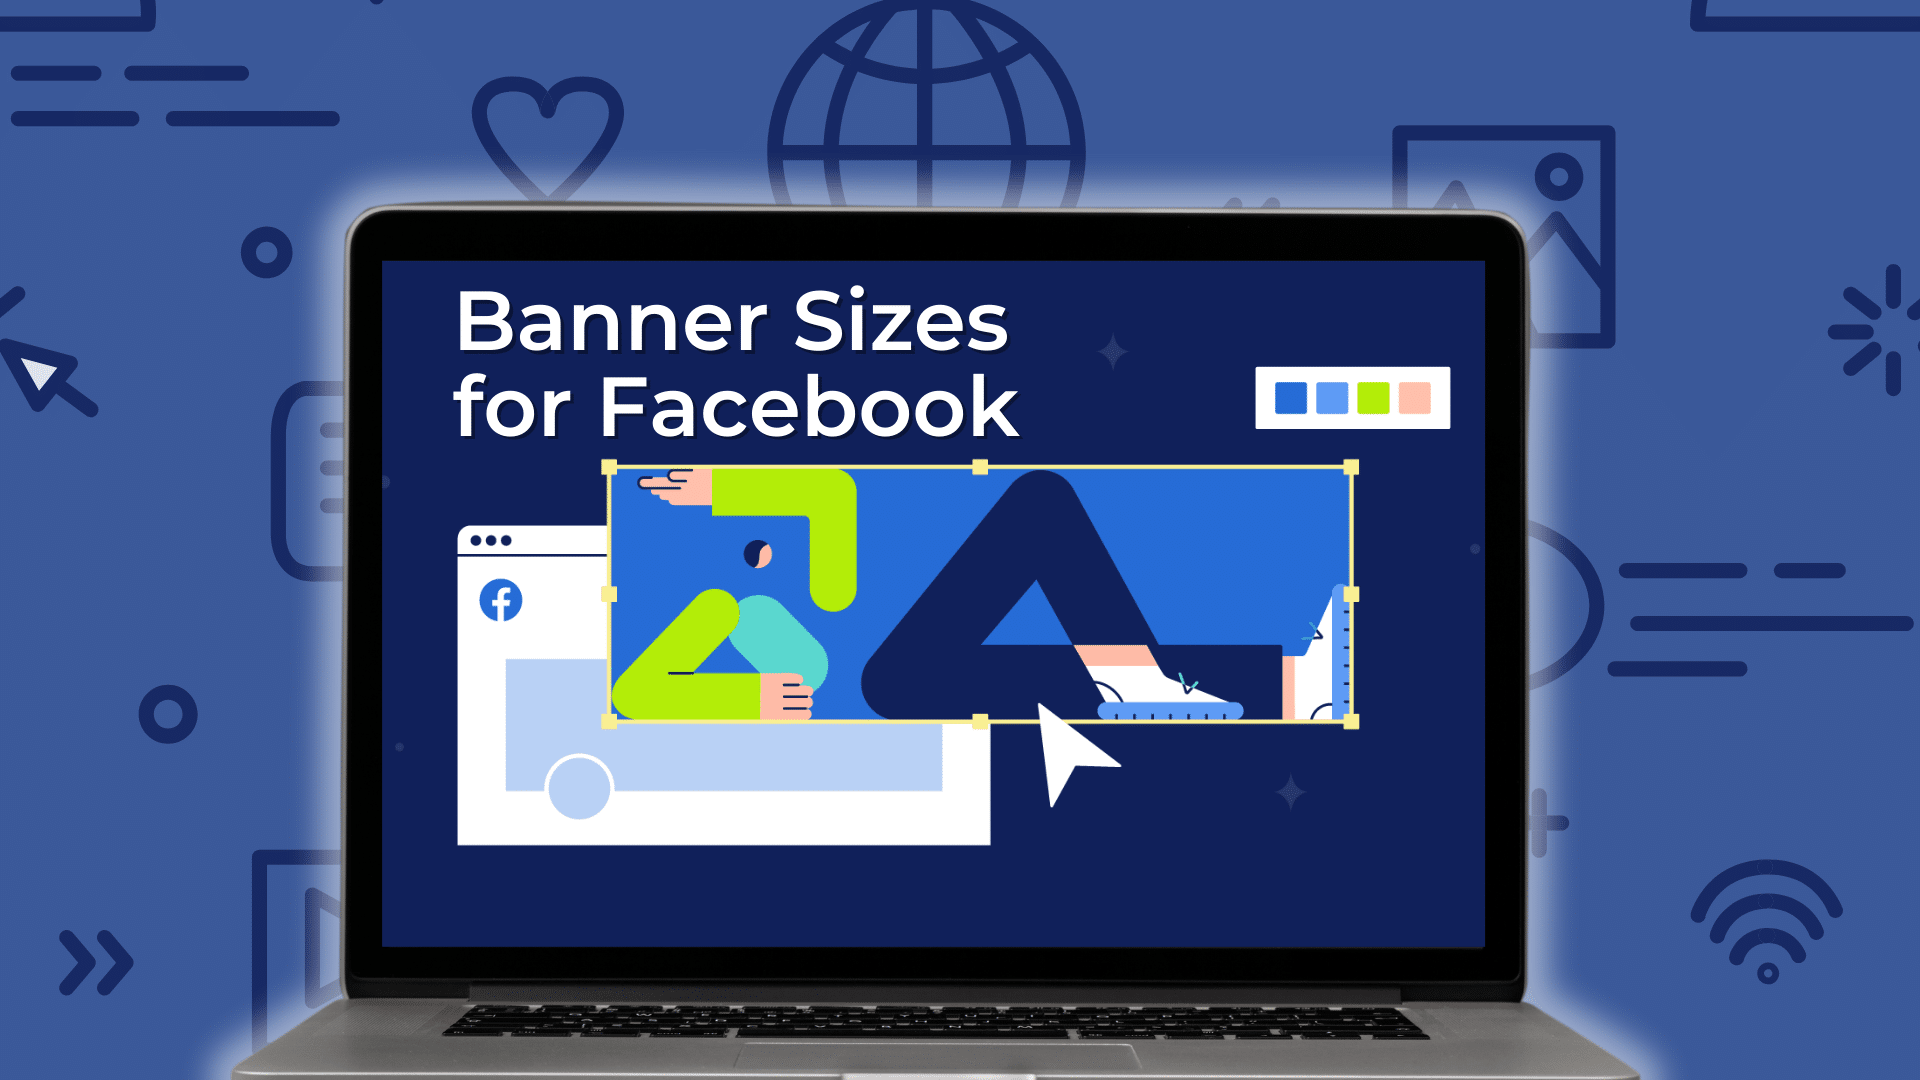 Banner Sizes for Facebook: A Quick Guide